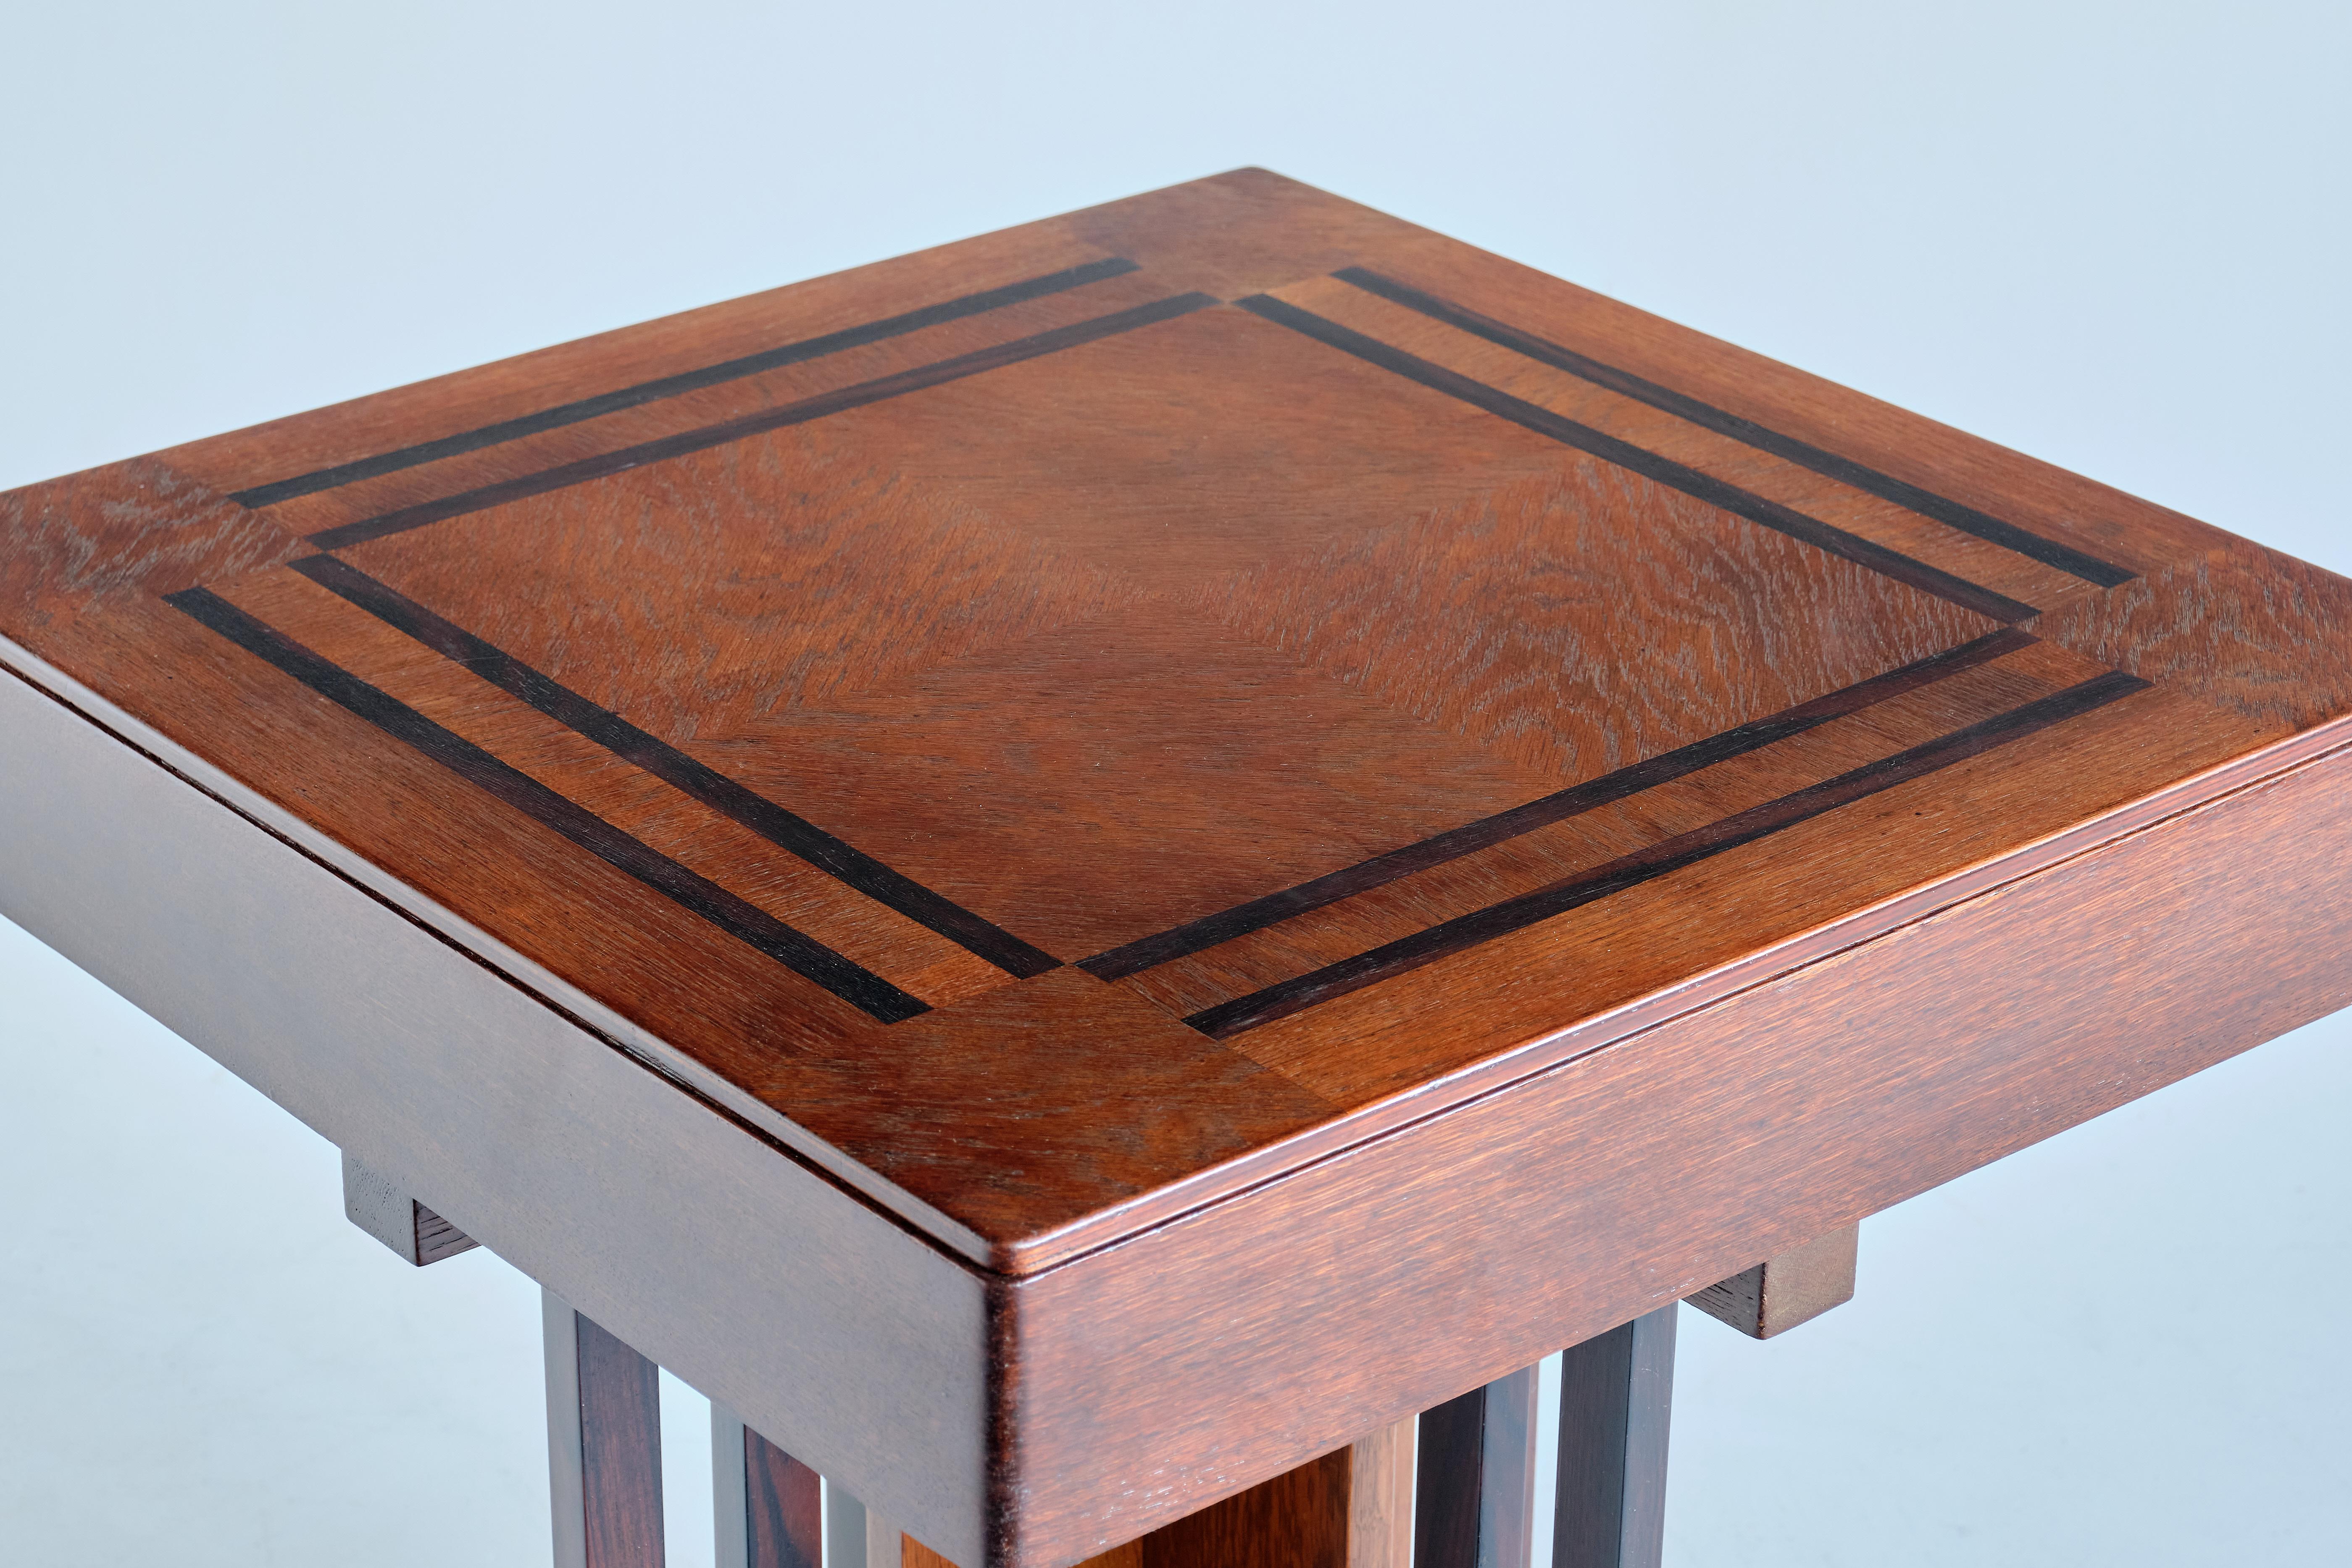 P.E.L. Izeren Side Table in Oak and Macassar Ebony, Netherlands, 1930s For Sale 3